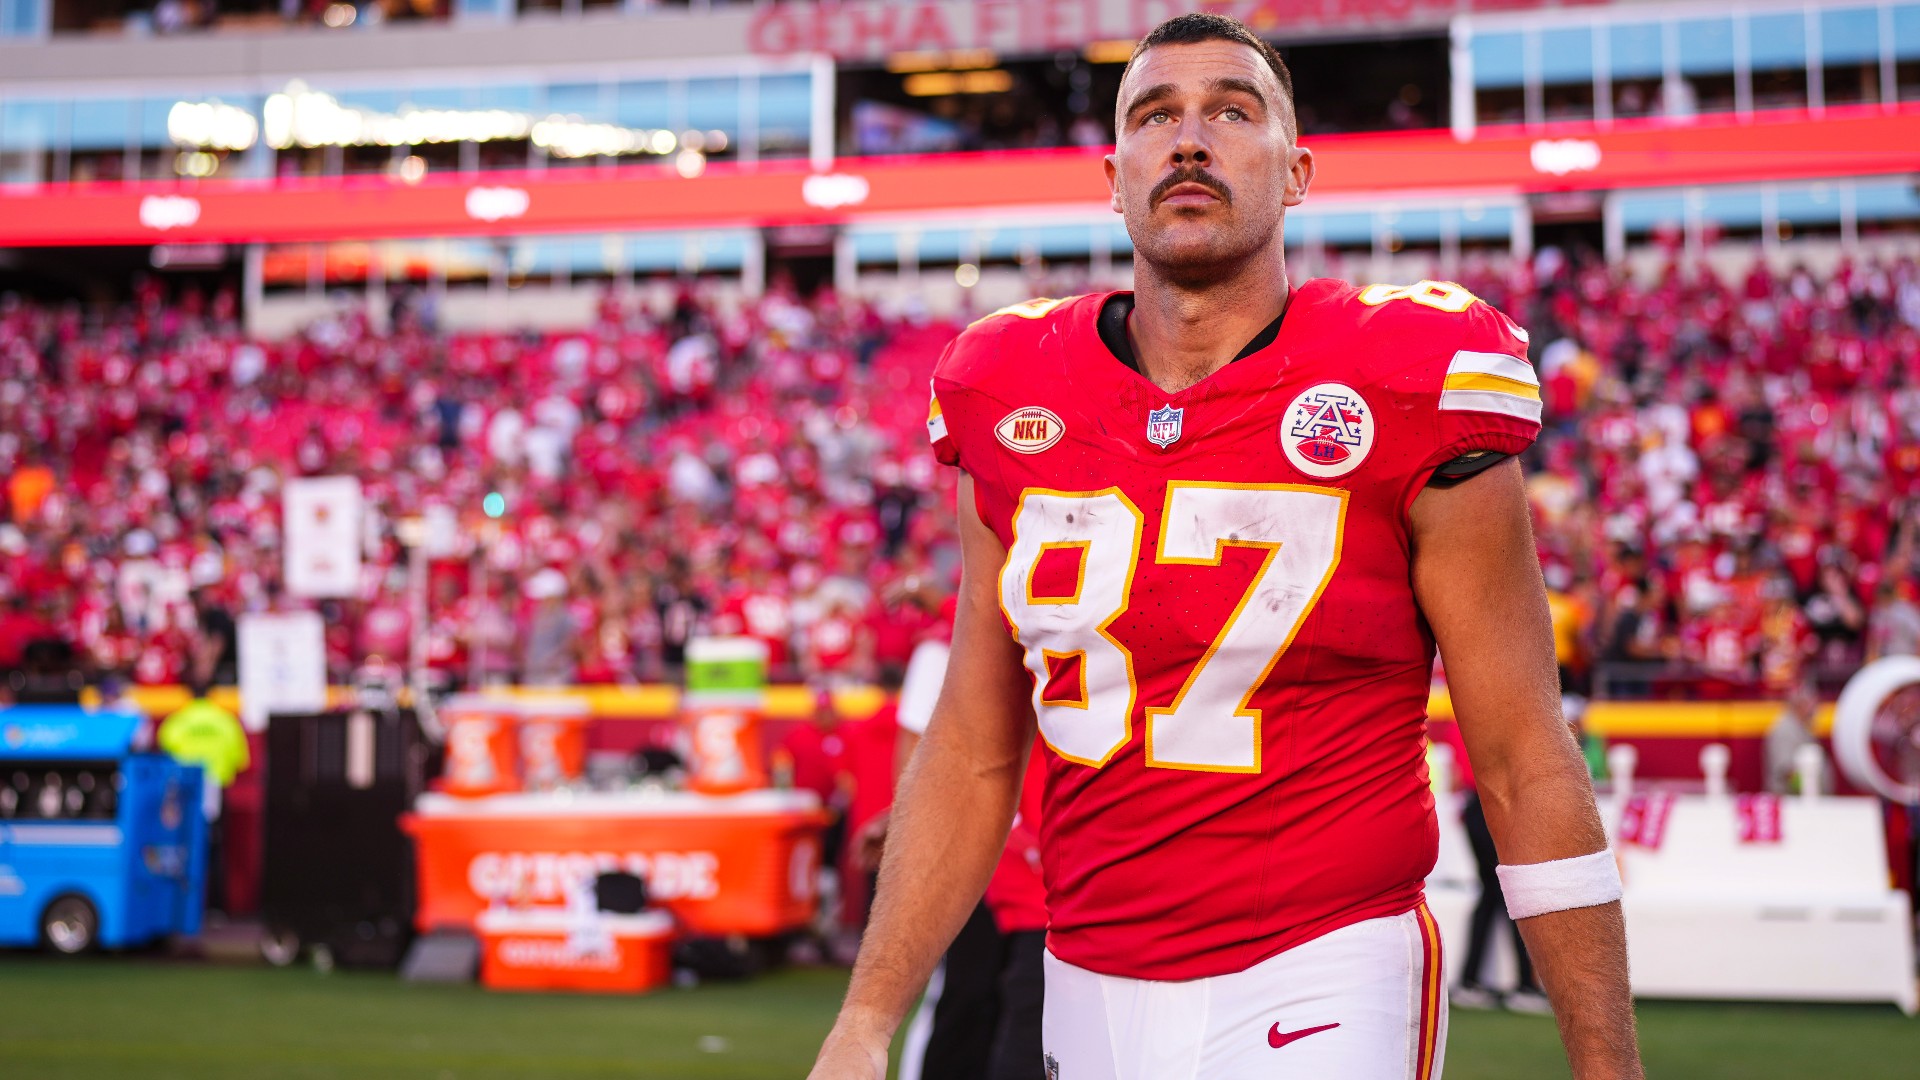 Travis Kelce Didn’t Mean to Shift the World’s Gaze onto His Relationship, But He “Can’t Be Mad” at It, Either, He Says